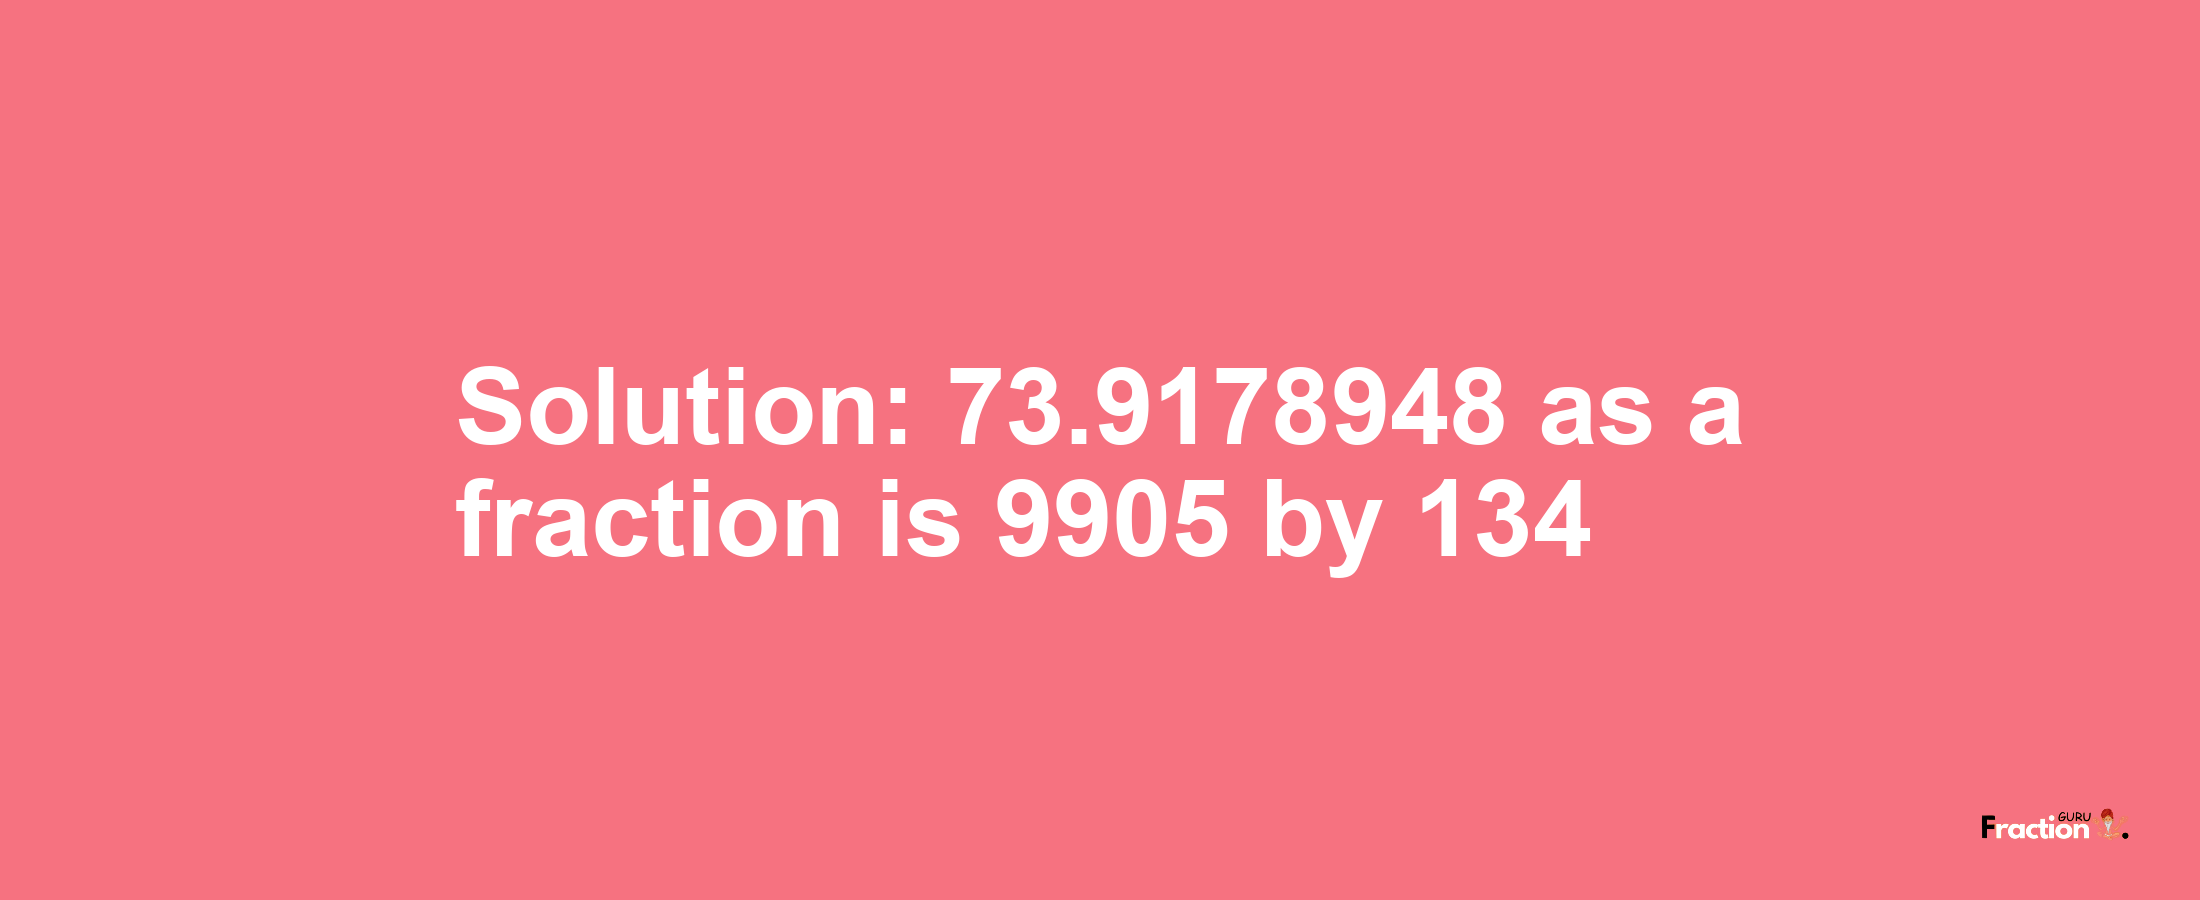 Solution:73.9178948 as a fraction is 9905/134